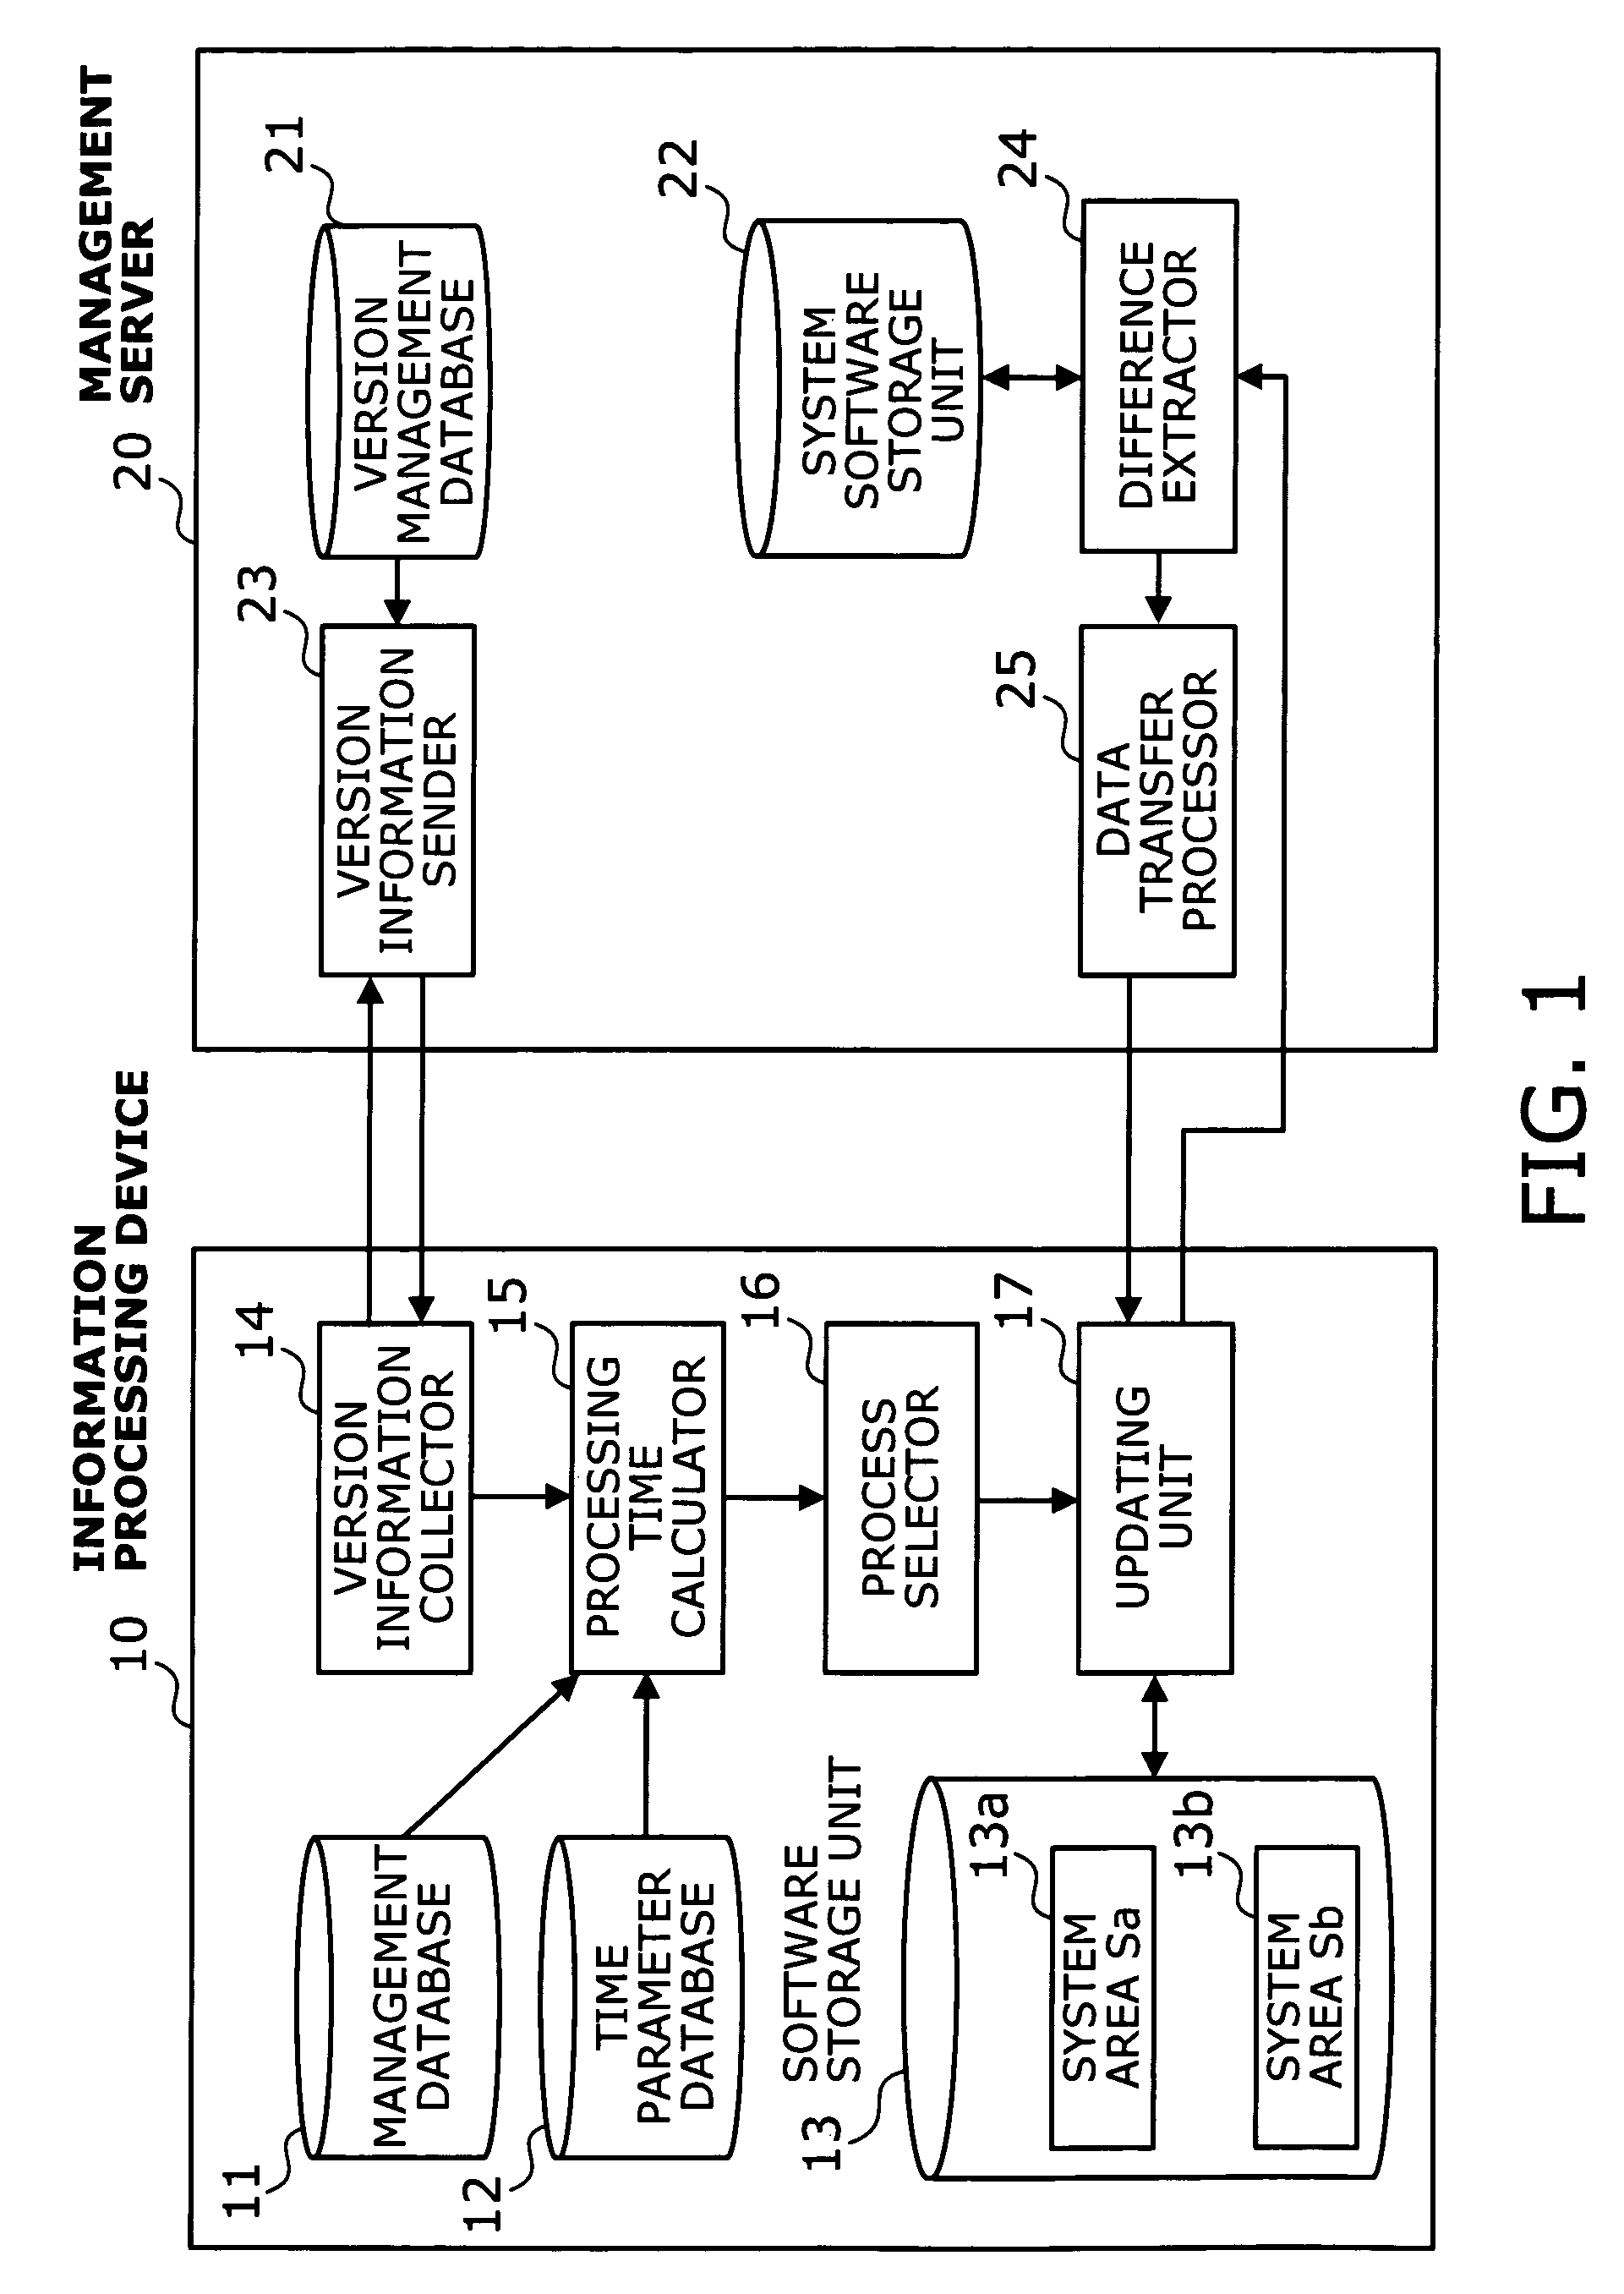 Computer program and apparatus for updating installed software programs by comparing update times